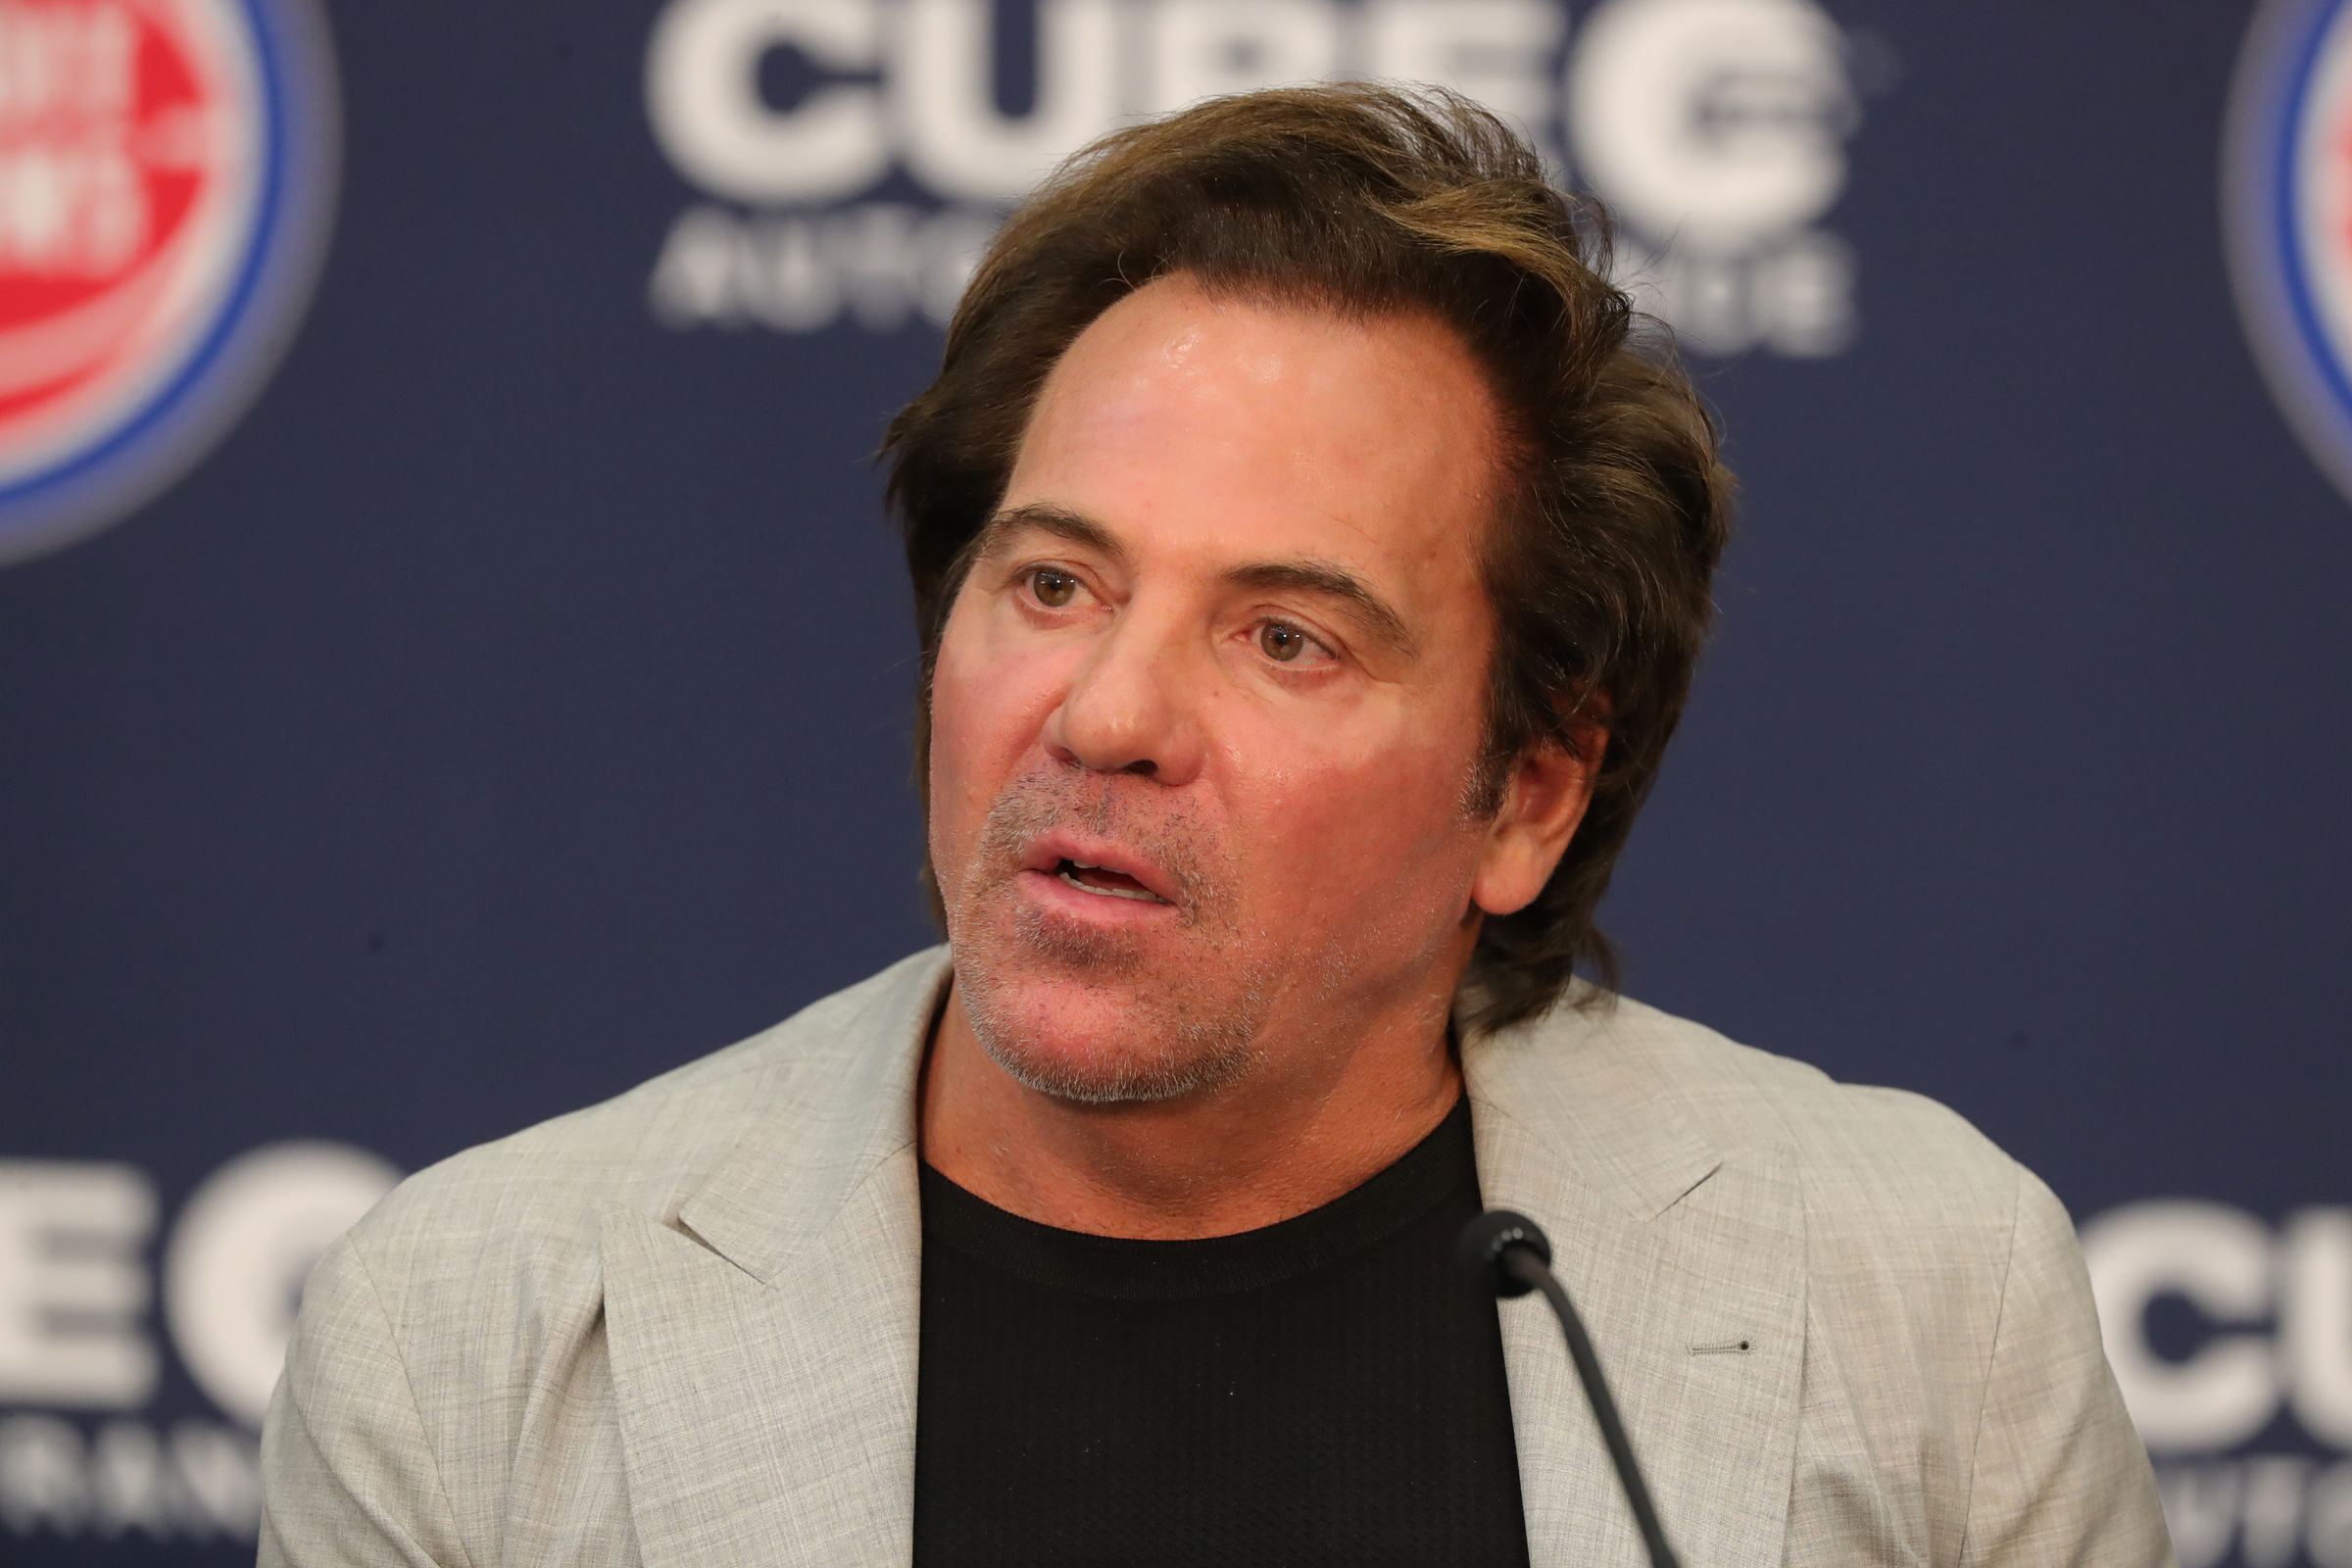 detroit pistons owner tom gores' response to 'sell the team' chants will anger fans amid 25-game losing streak